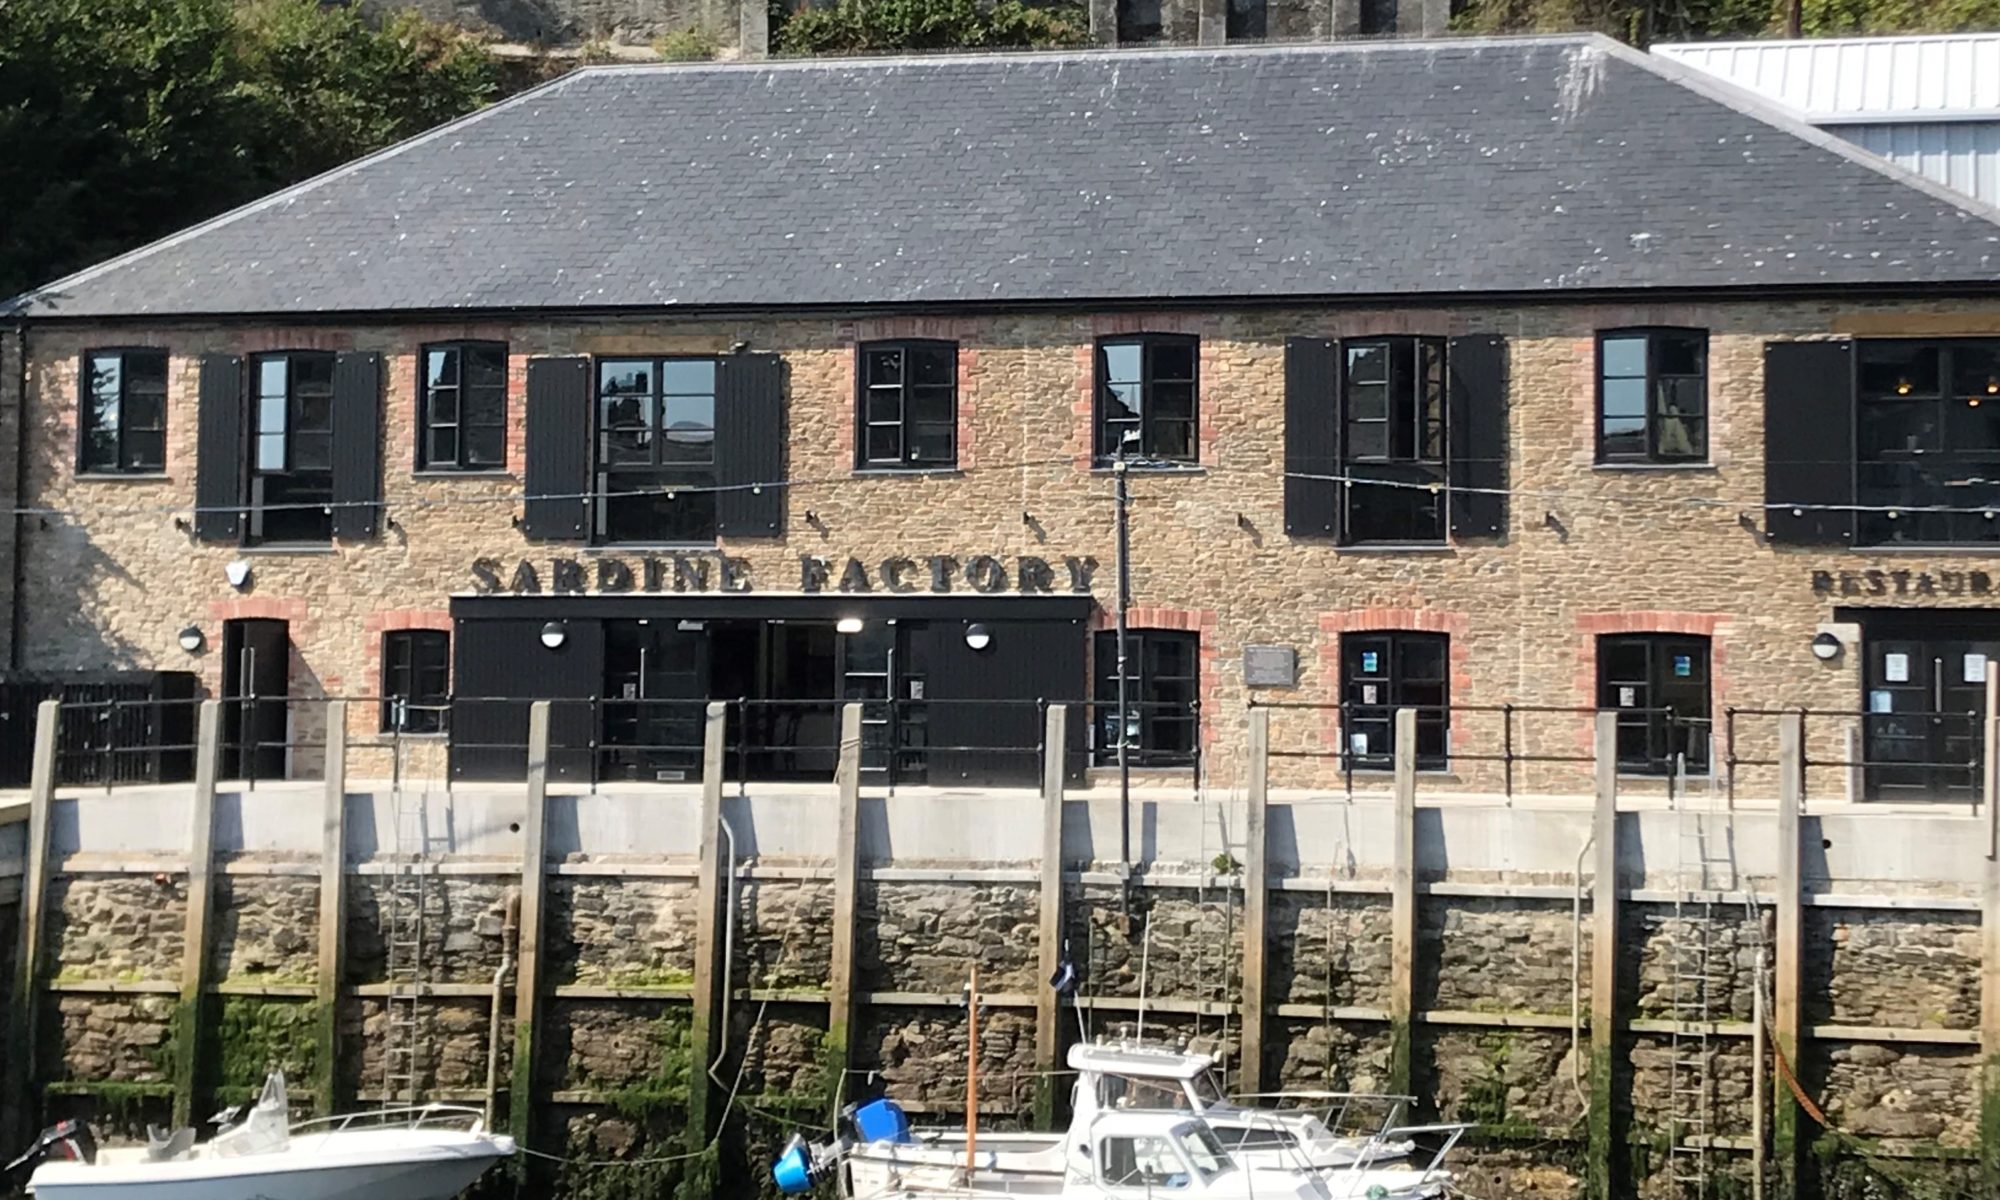 The Old Sardine Factory